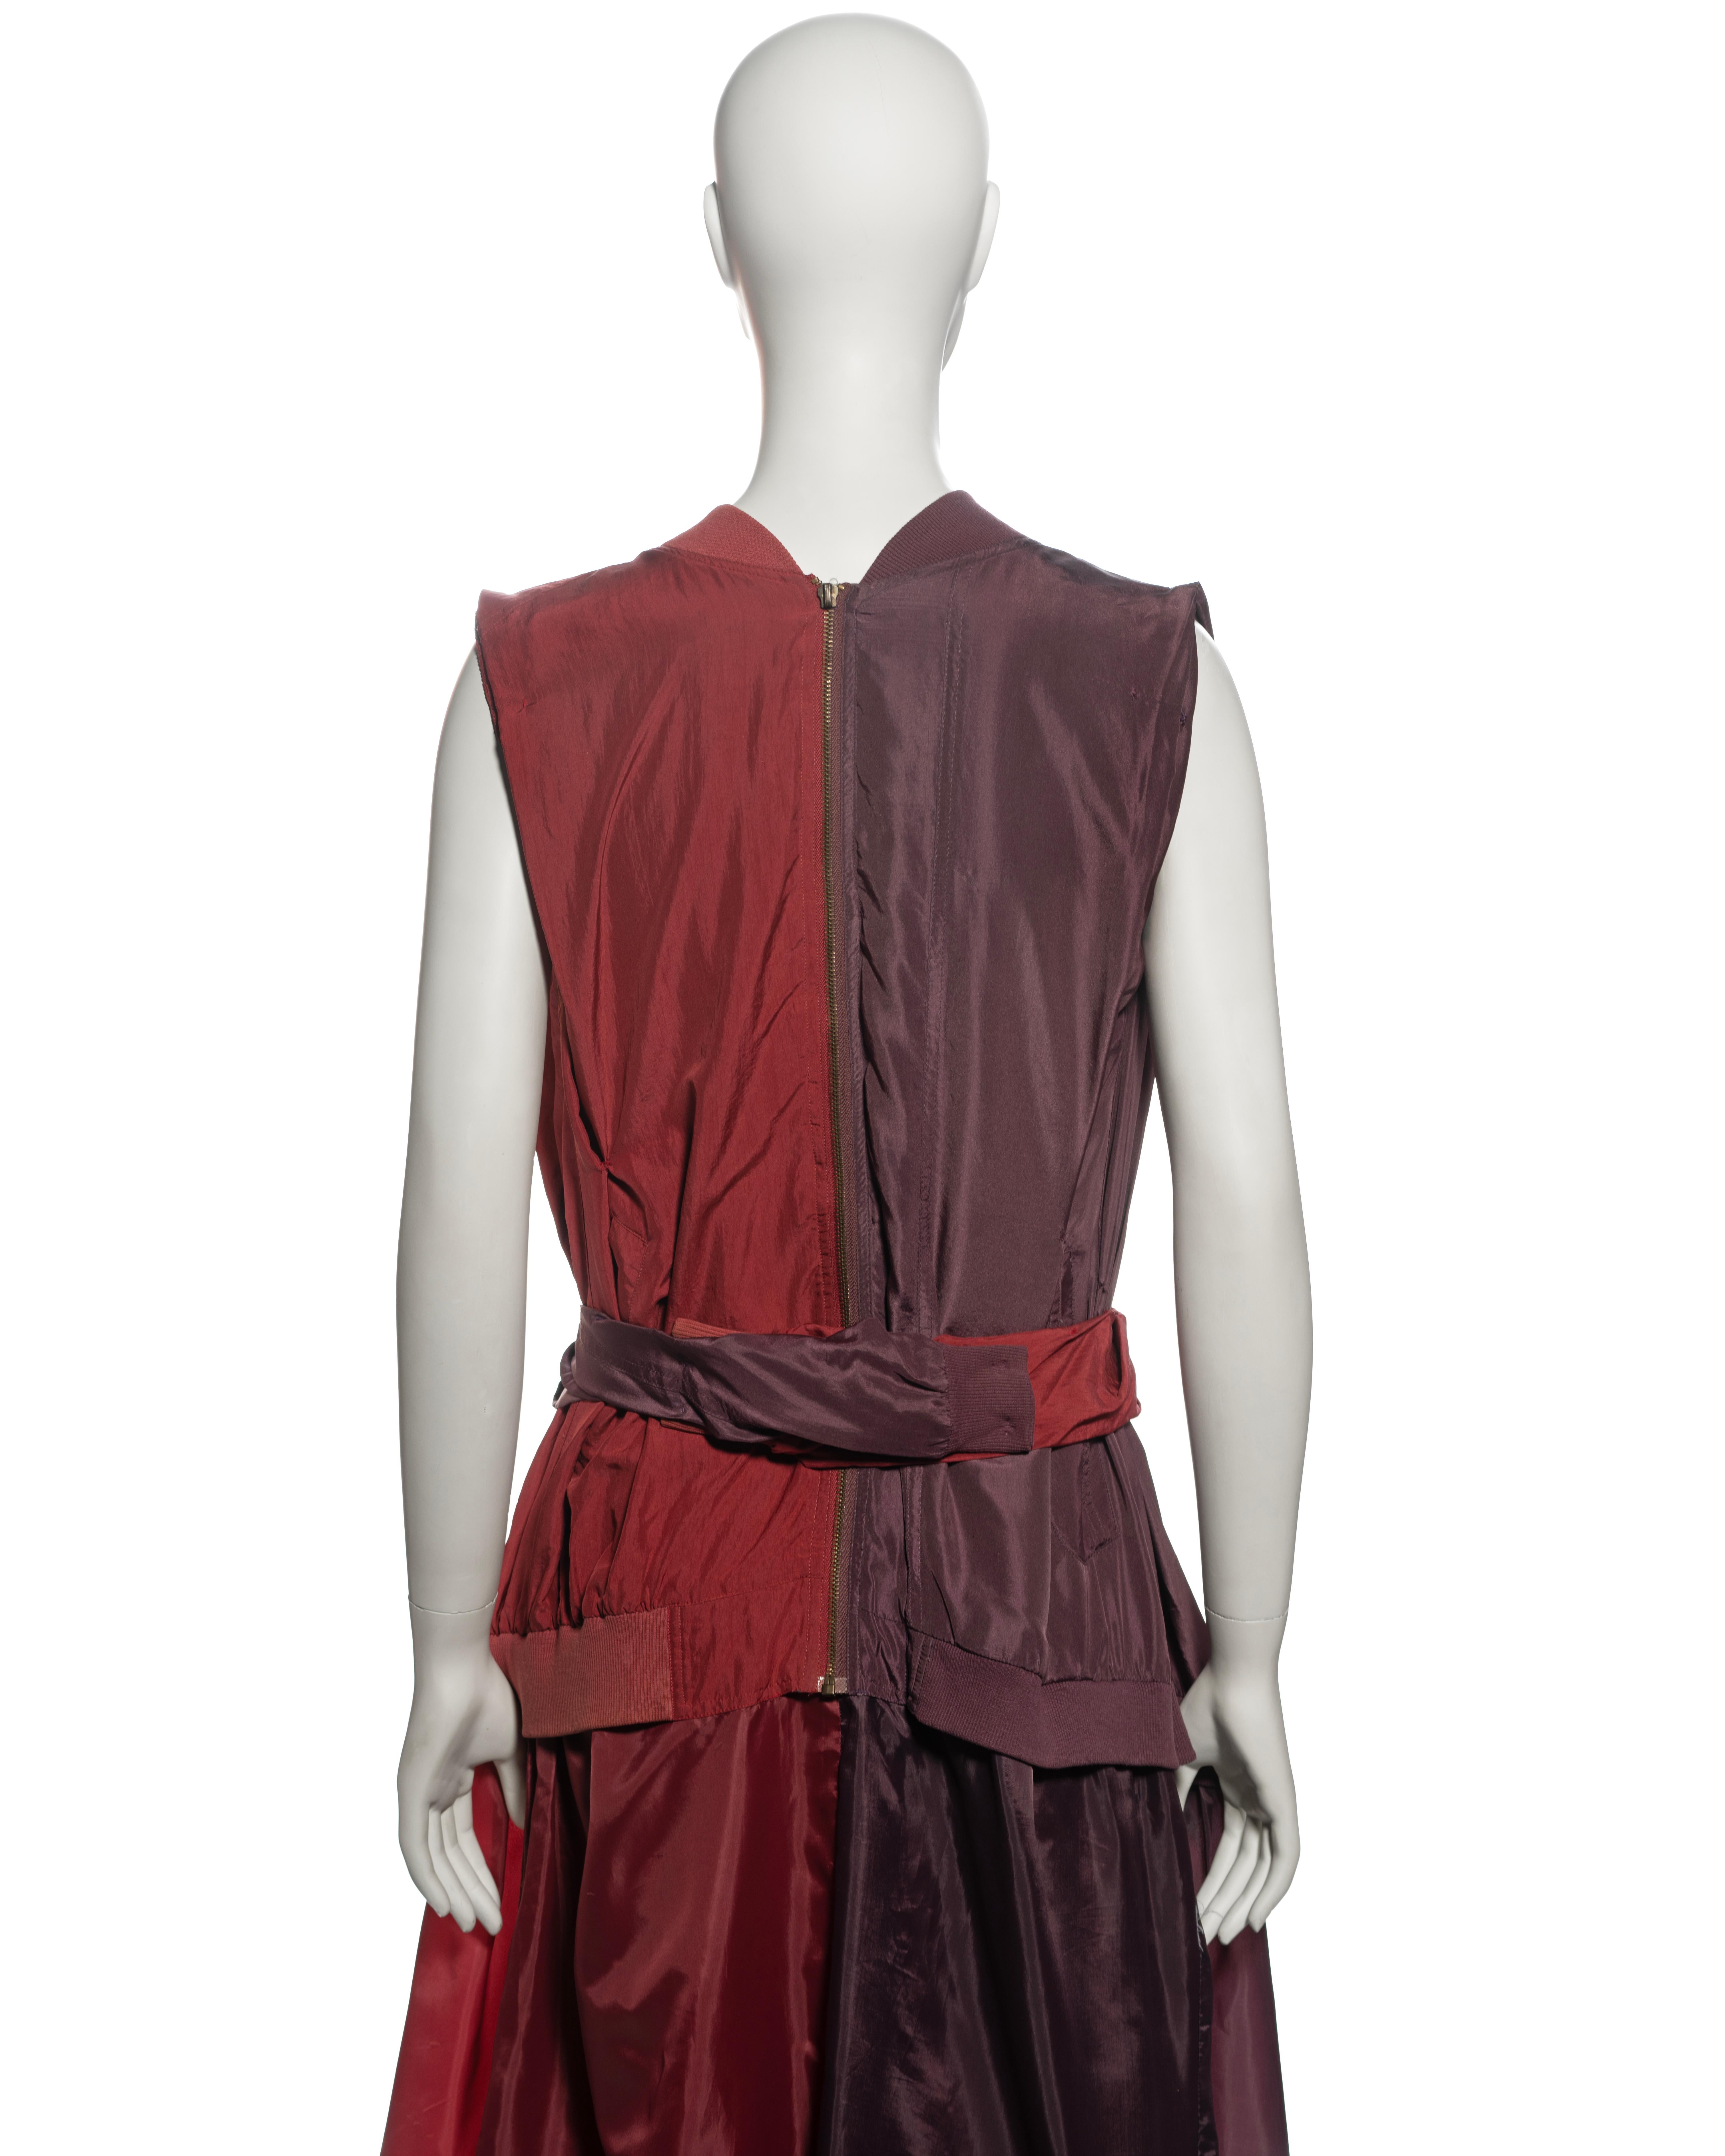 Martin Margiela Artisanal Dress Made Out of Vintage Blouson Jackets, fw 2004 For Sale 5